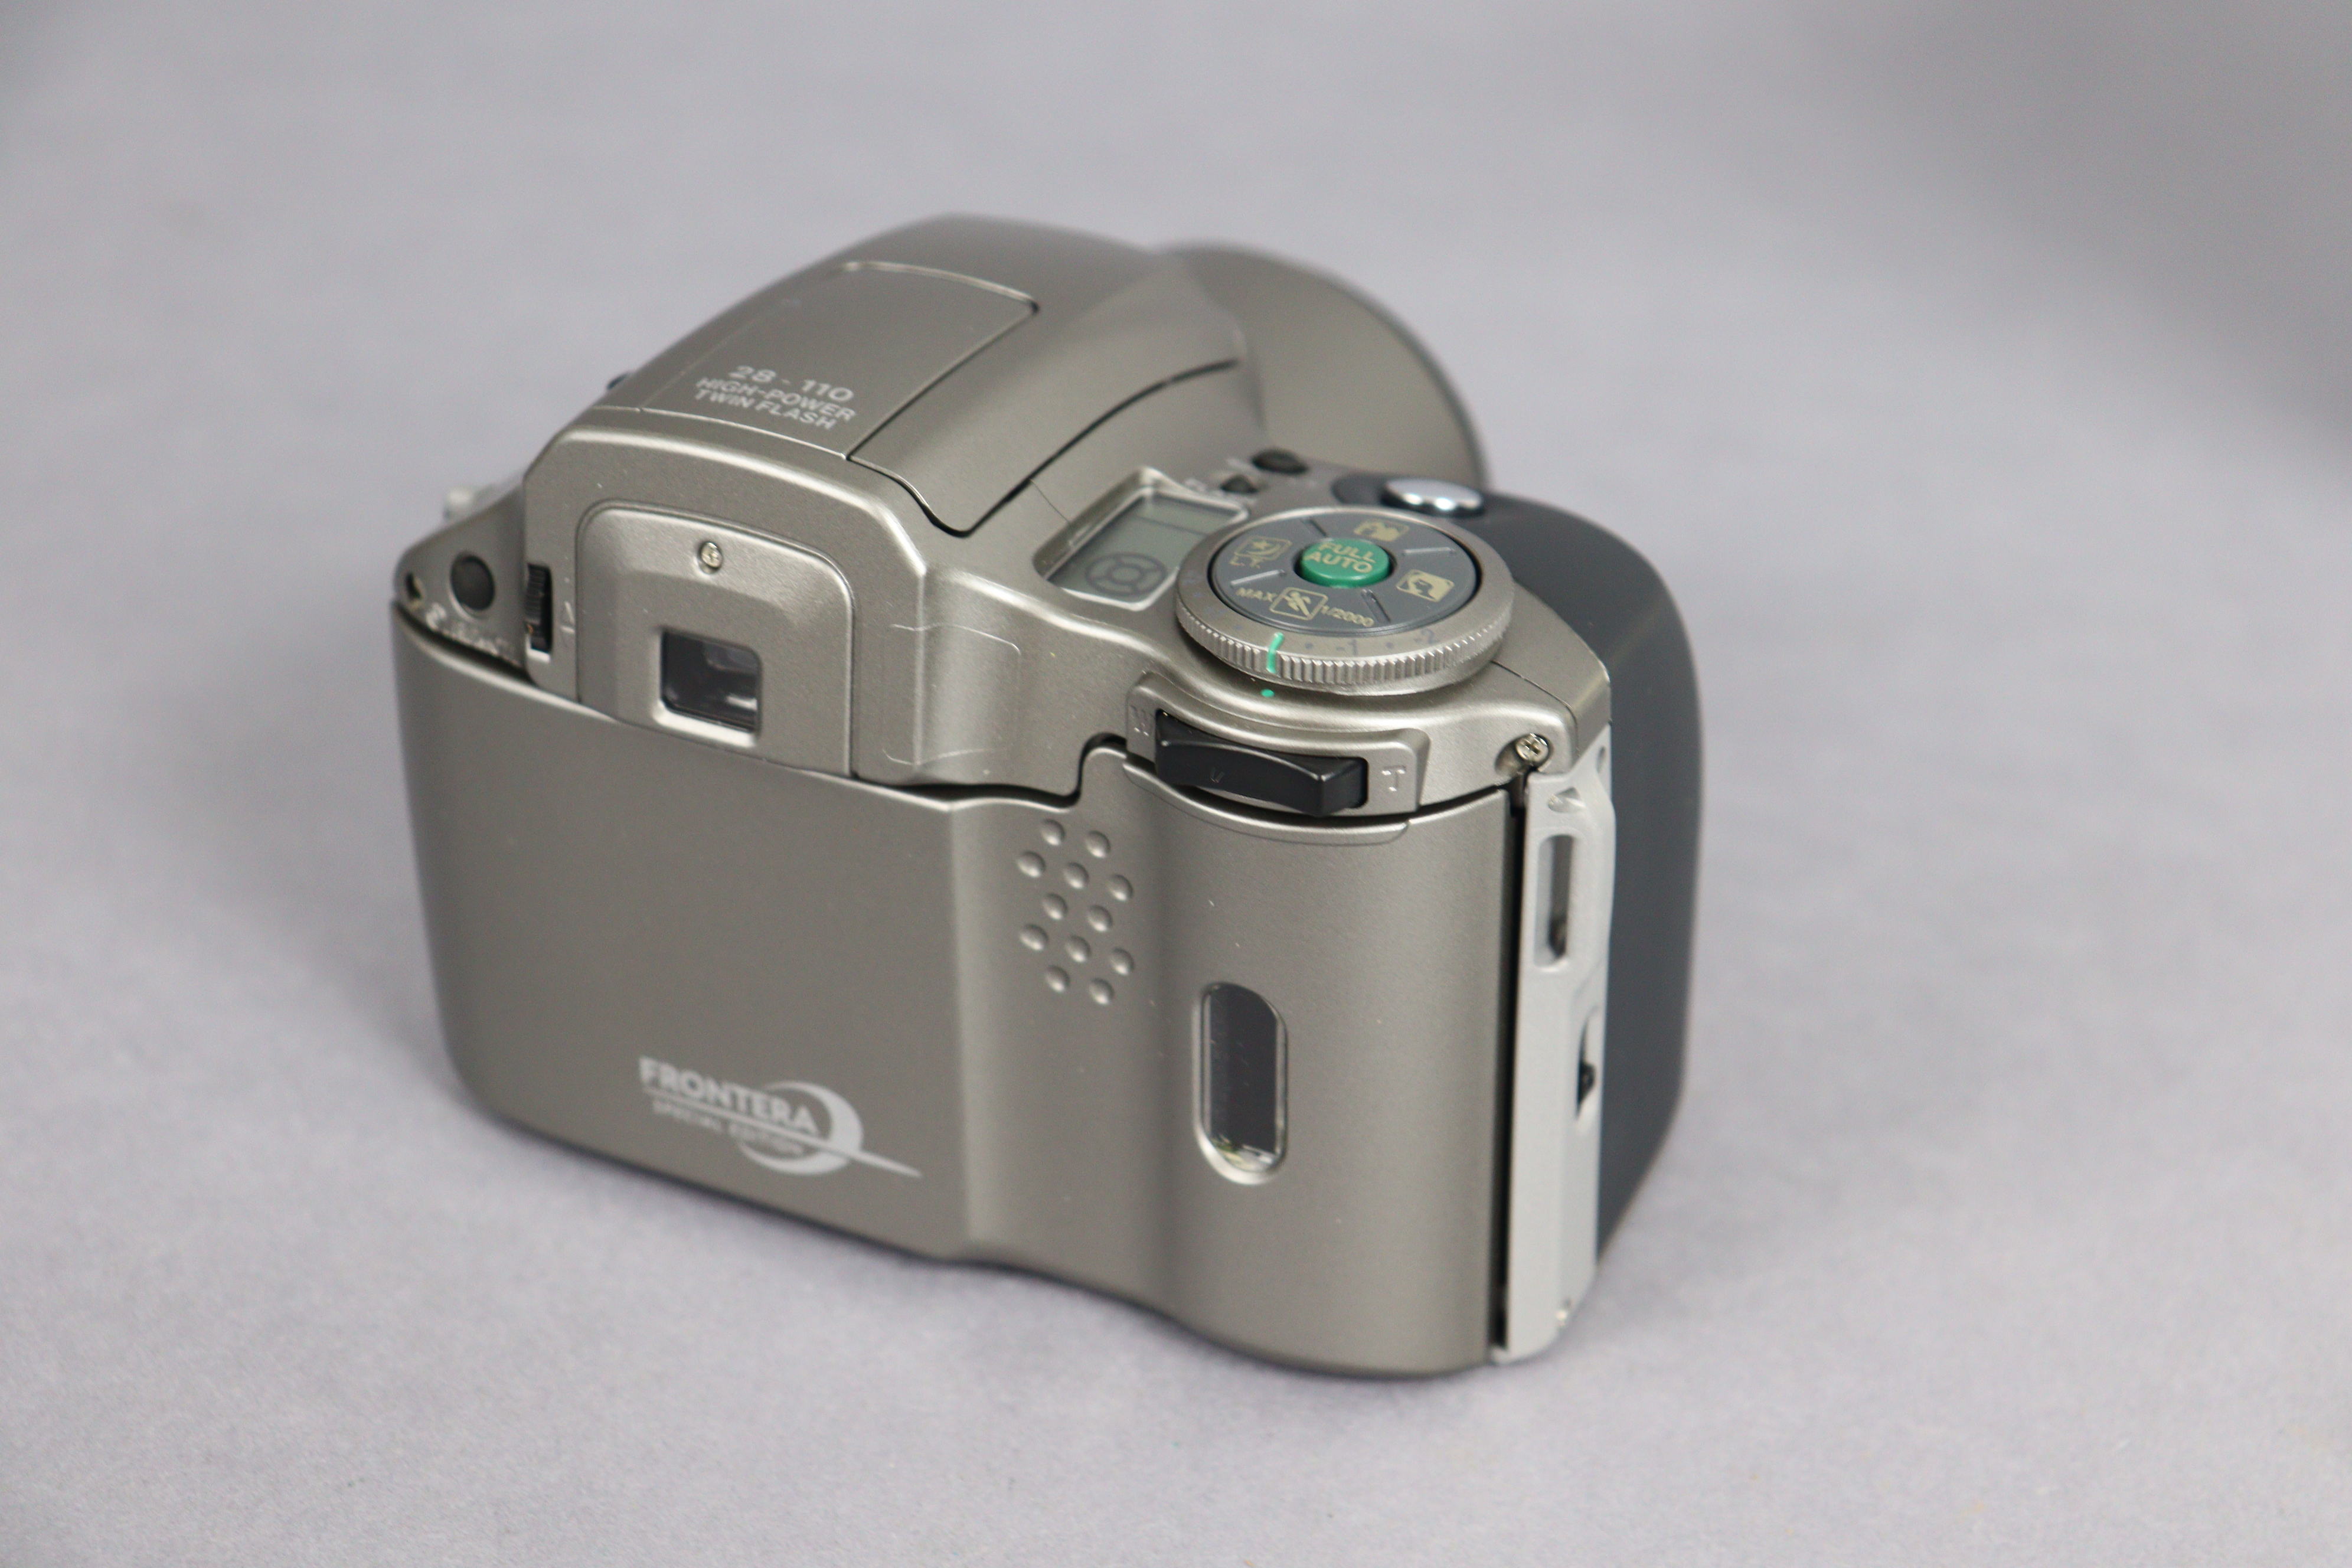 An Olympus “IS-300” camera, boxed. - Image 3 of 3